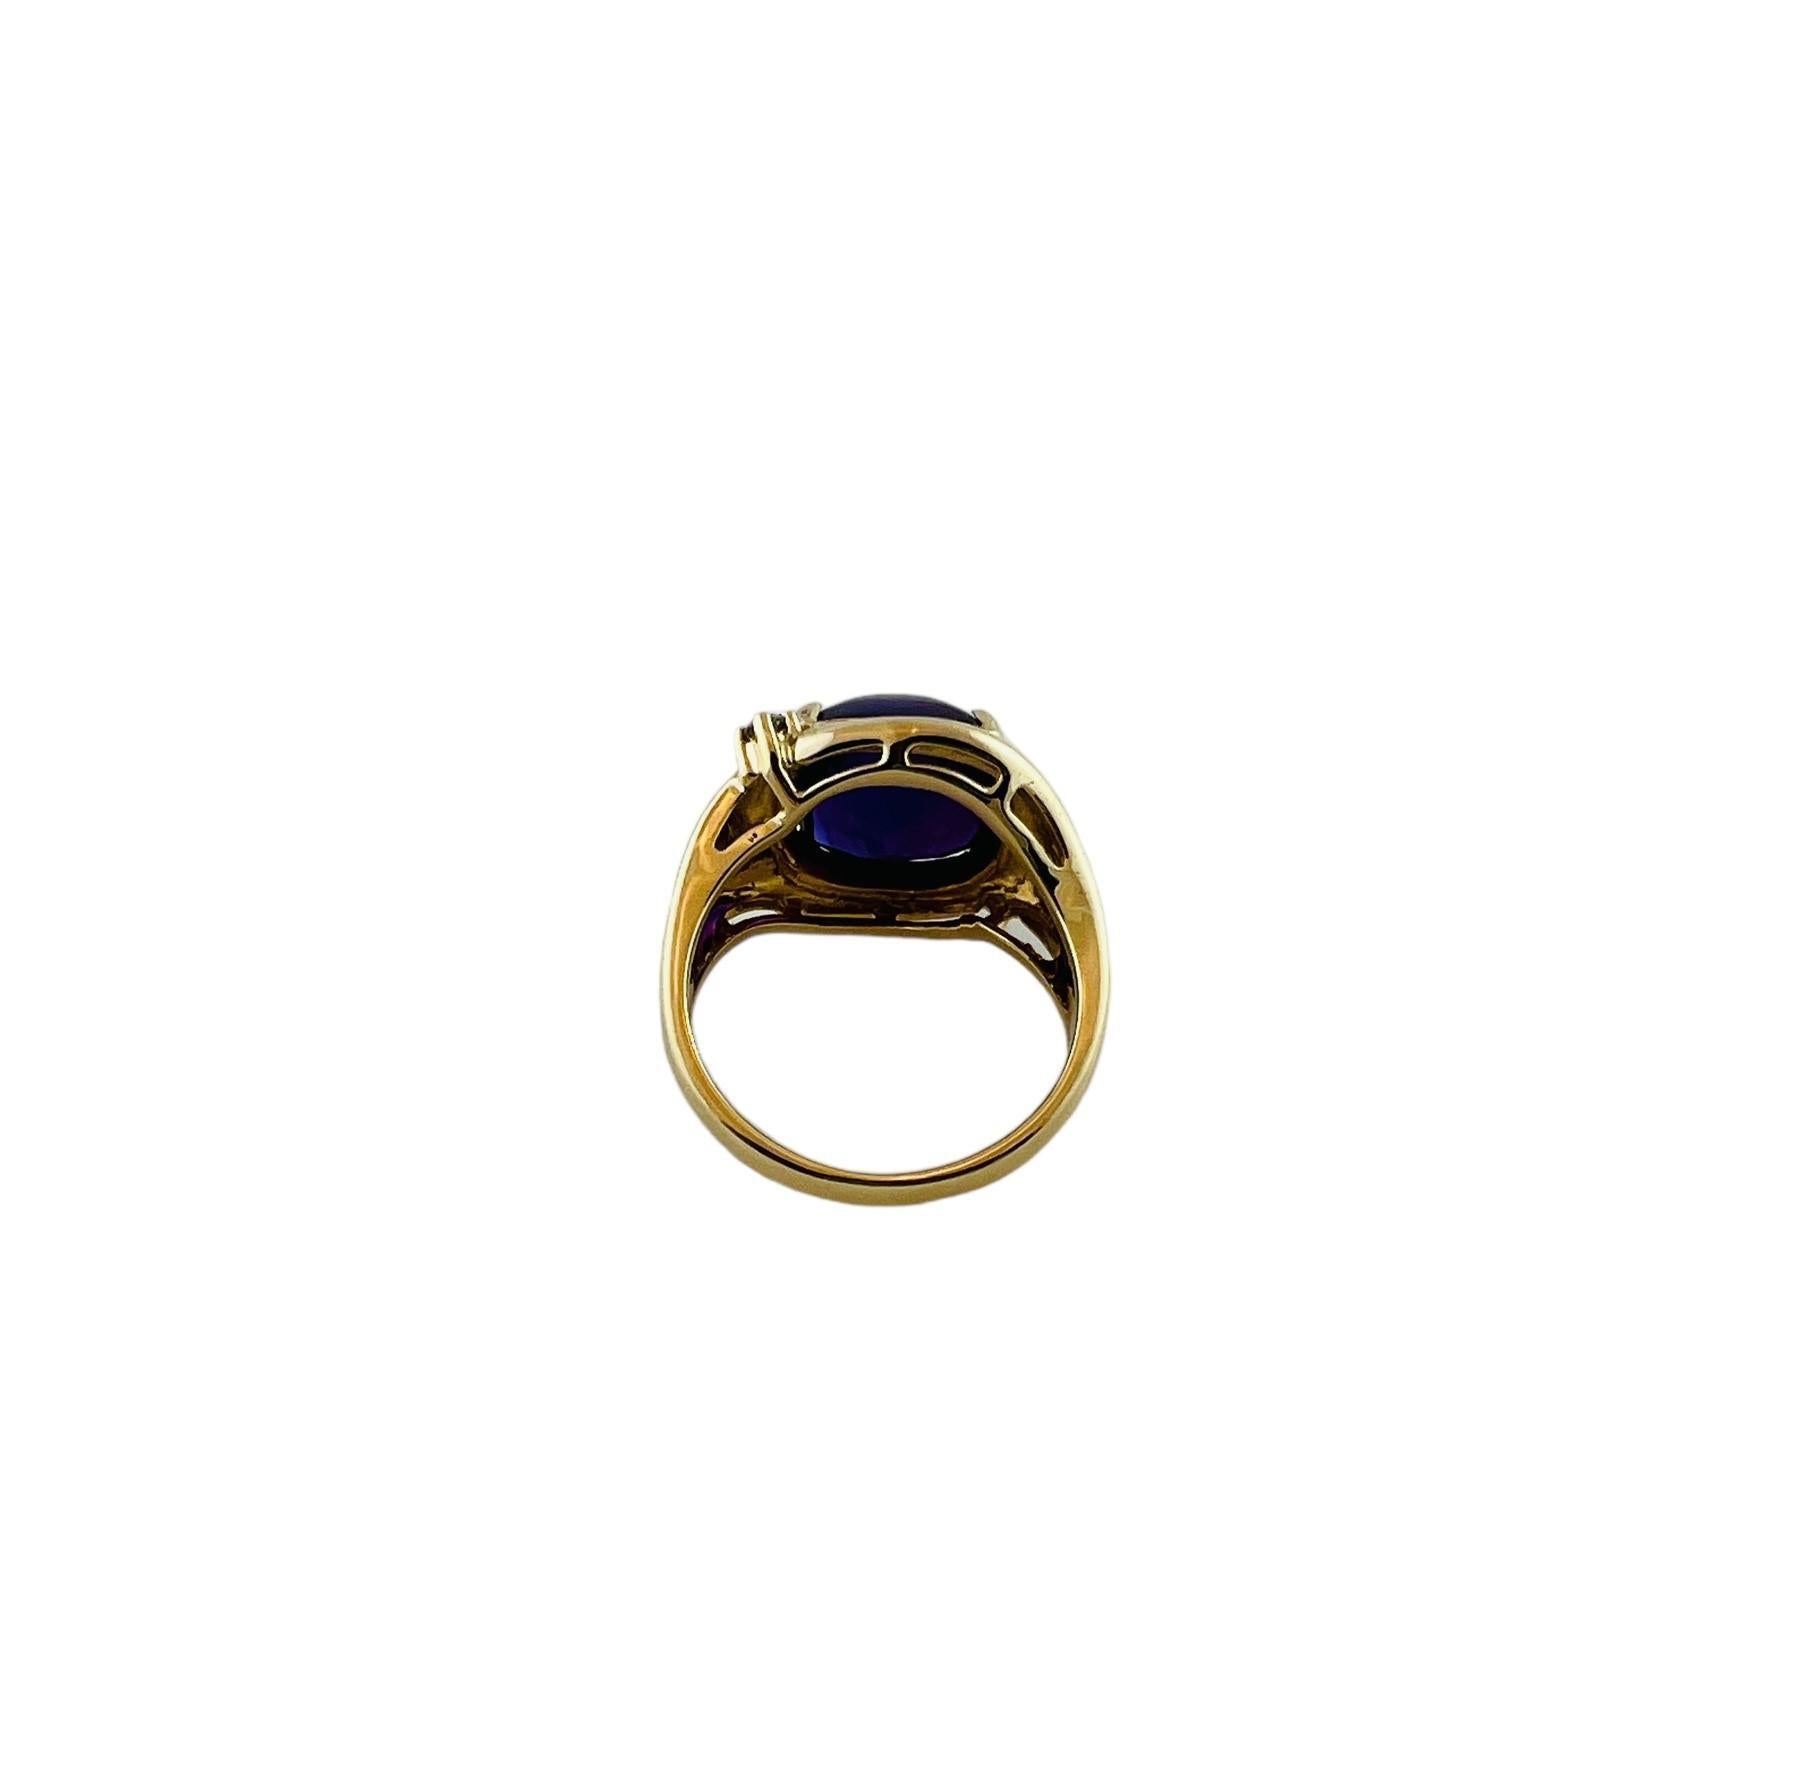 14K Yellow Gold Amethyst Diamond Ring Size 6.25 #15670 For Sale 1